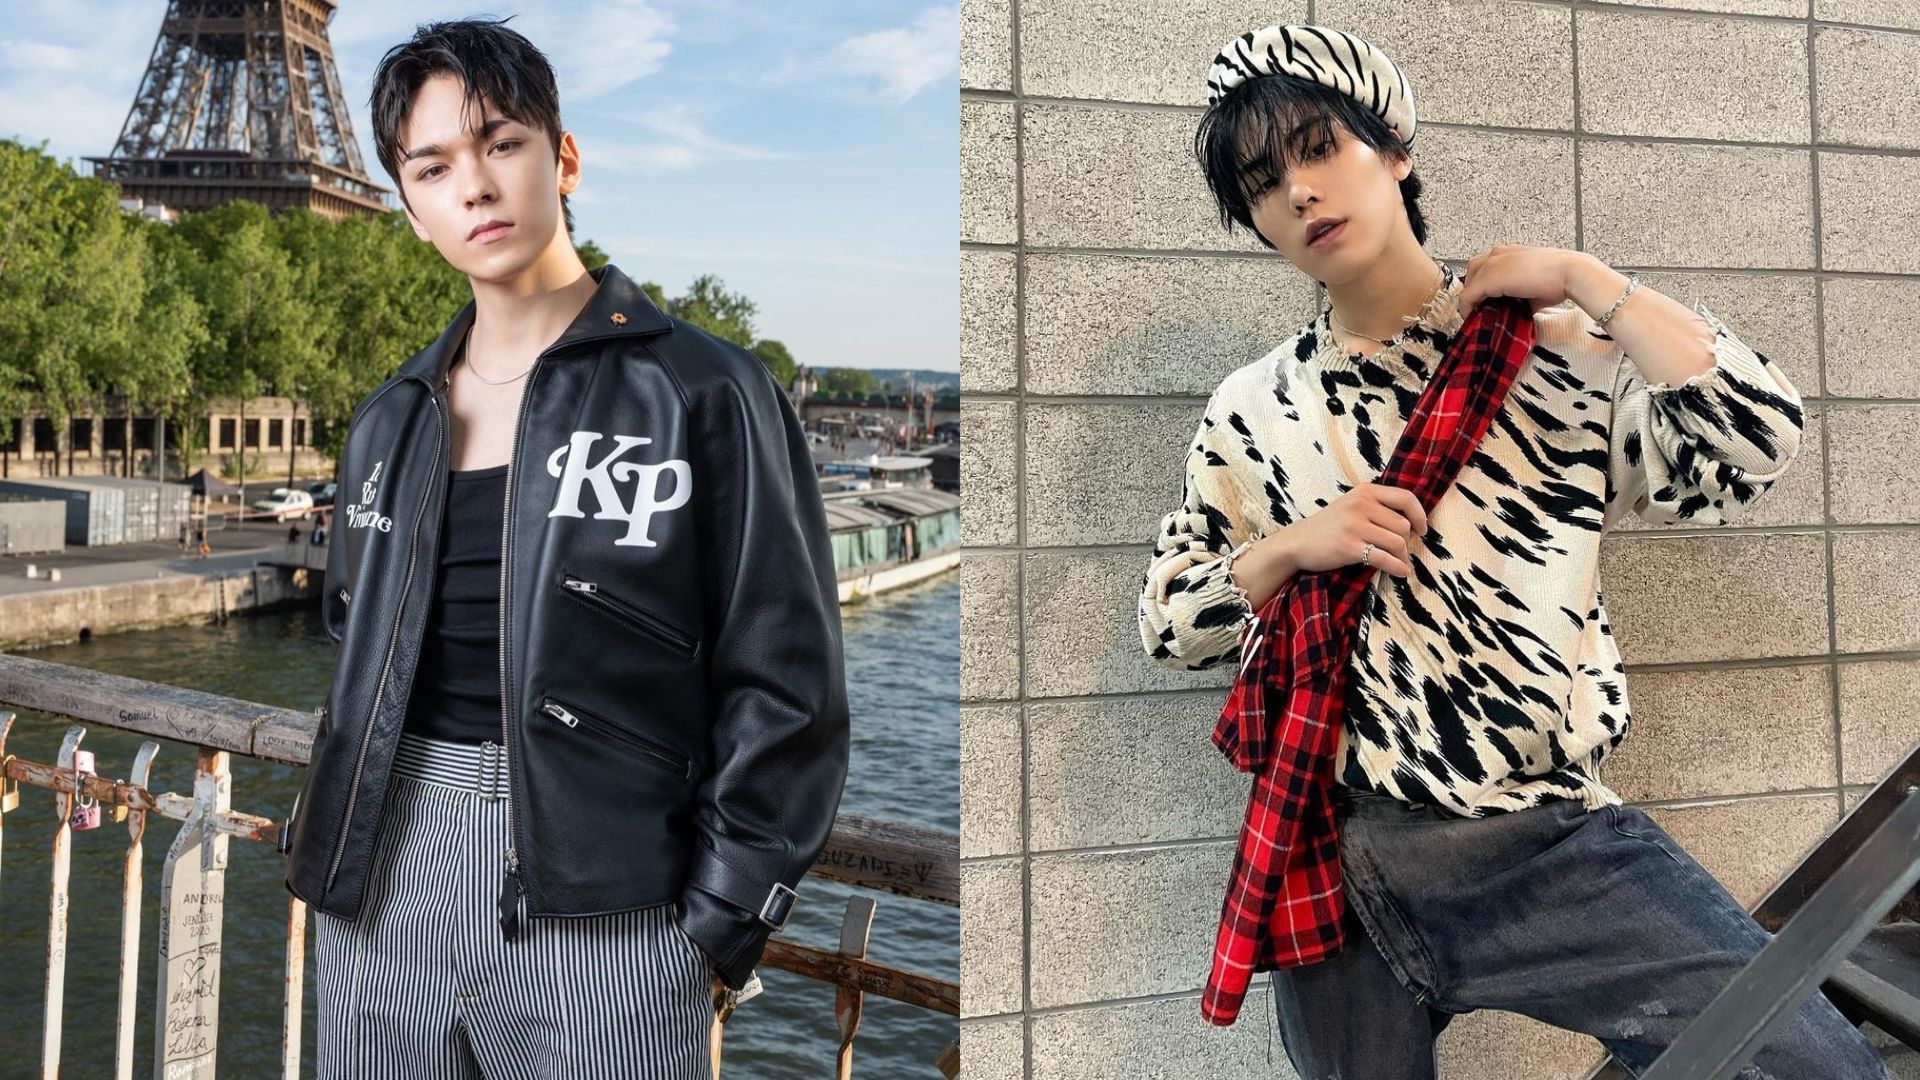 BTS's Jimin And J-Hope Rocked The Same Louis Vuitton Cardigan In